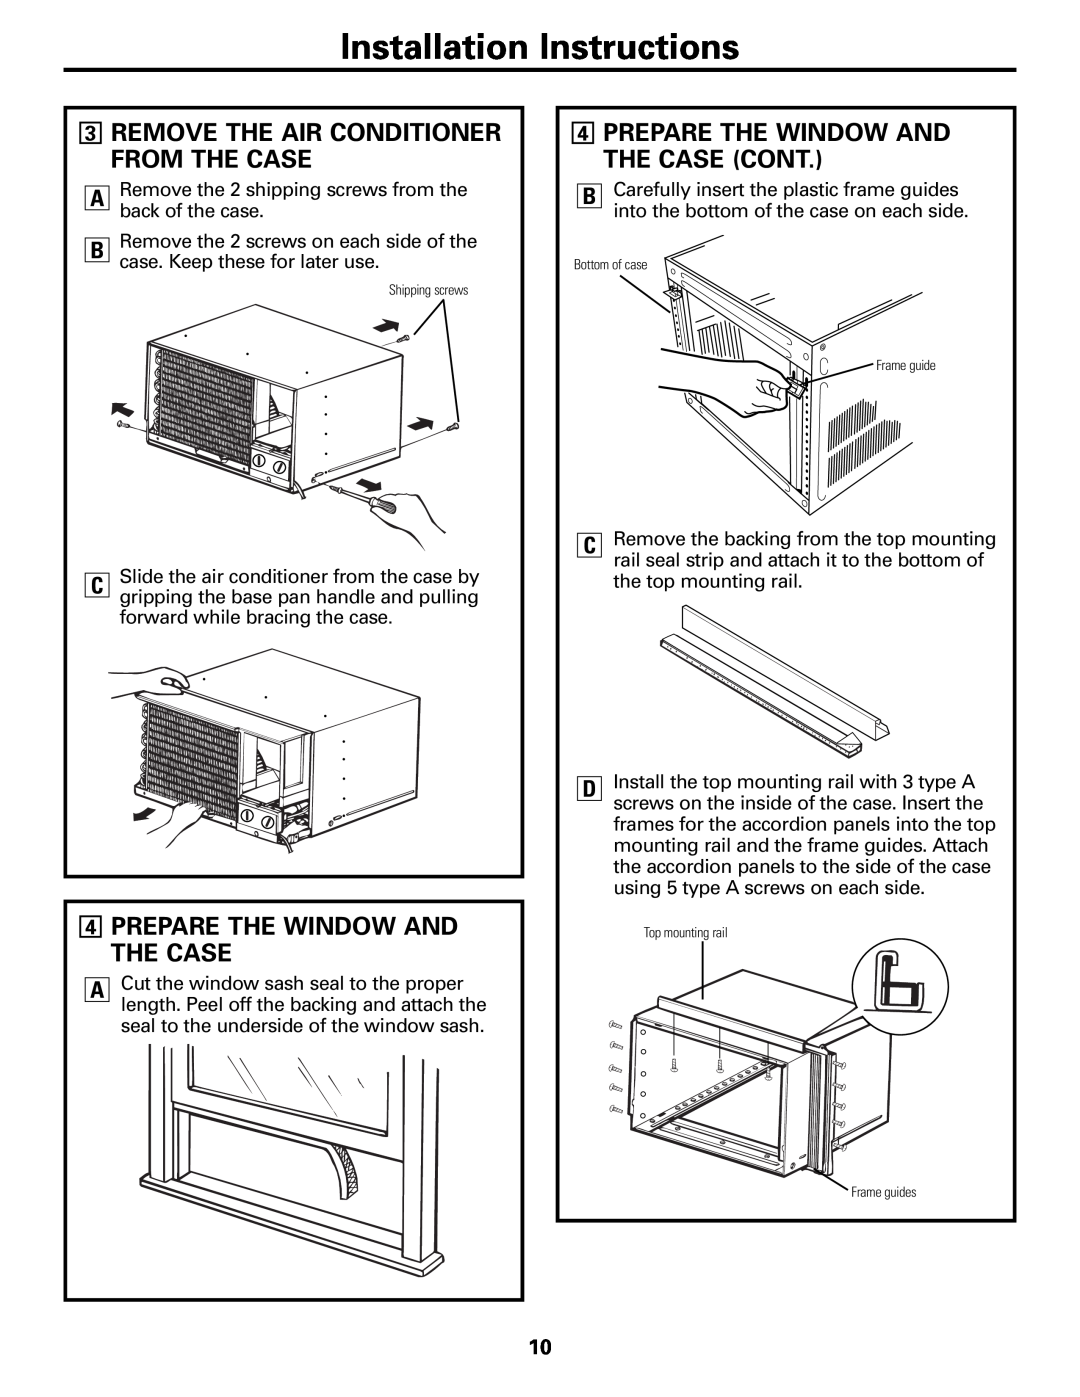 GE ASD06* 3REMOVE THE AIR CONDITIONER FROM THE CASE, 4PREPARE THE WINDOW AND THE CASE, Installation Instructions 